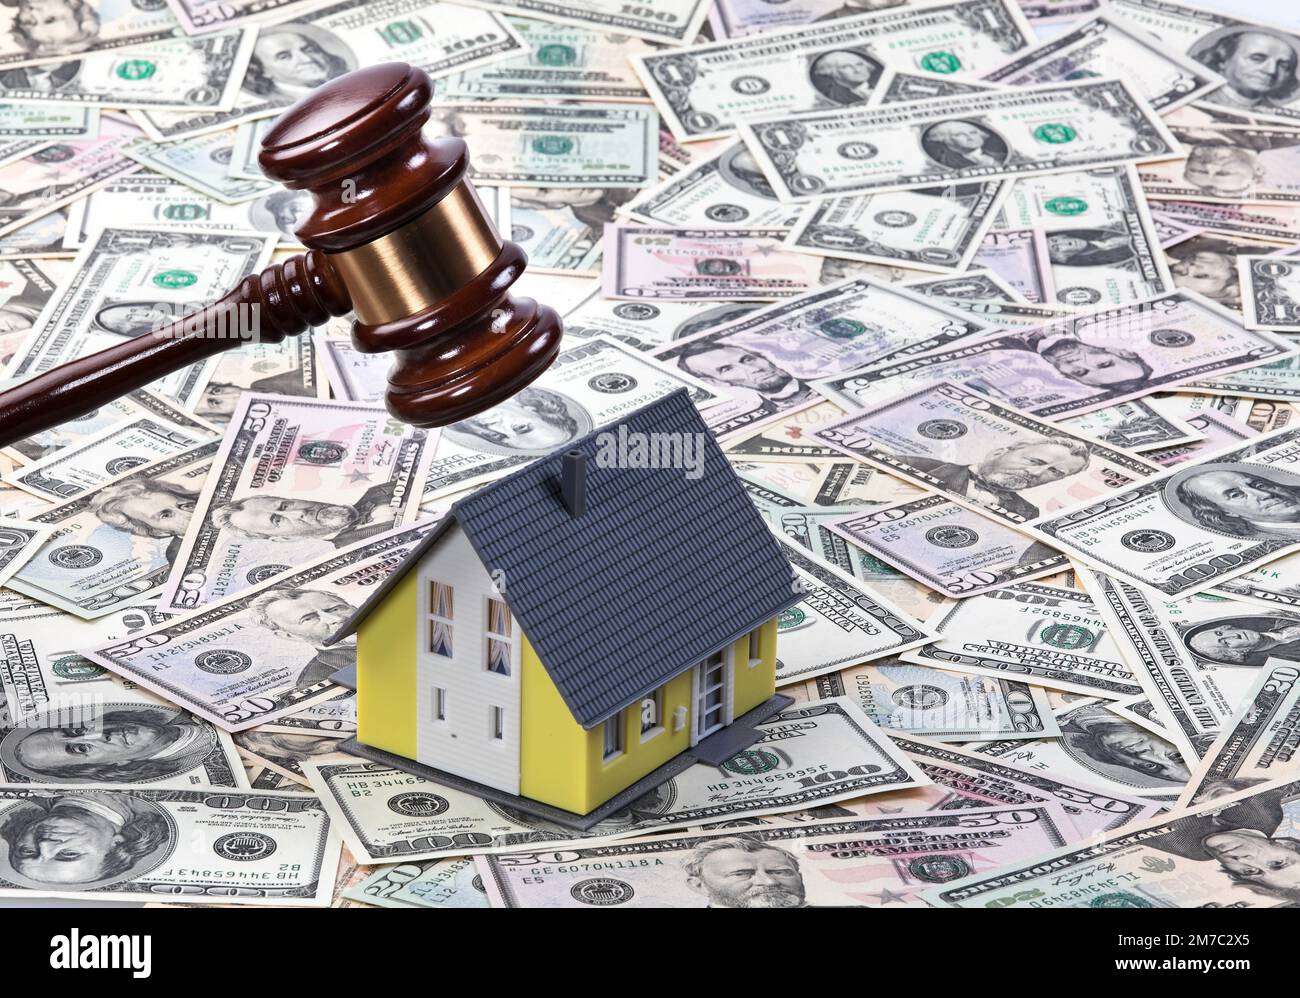 auction hammer/justice hammer with house and Dollar bills, real estate crisis, Japan Stock Photo